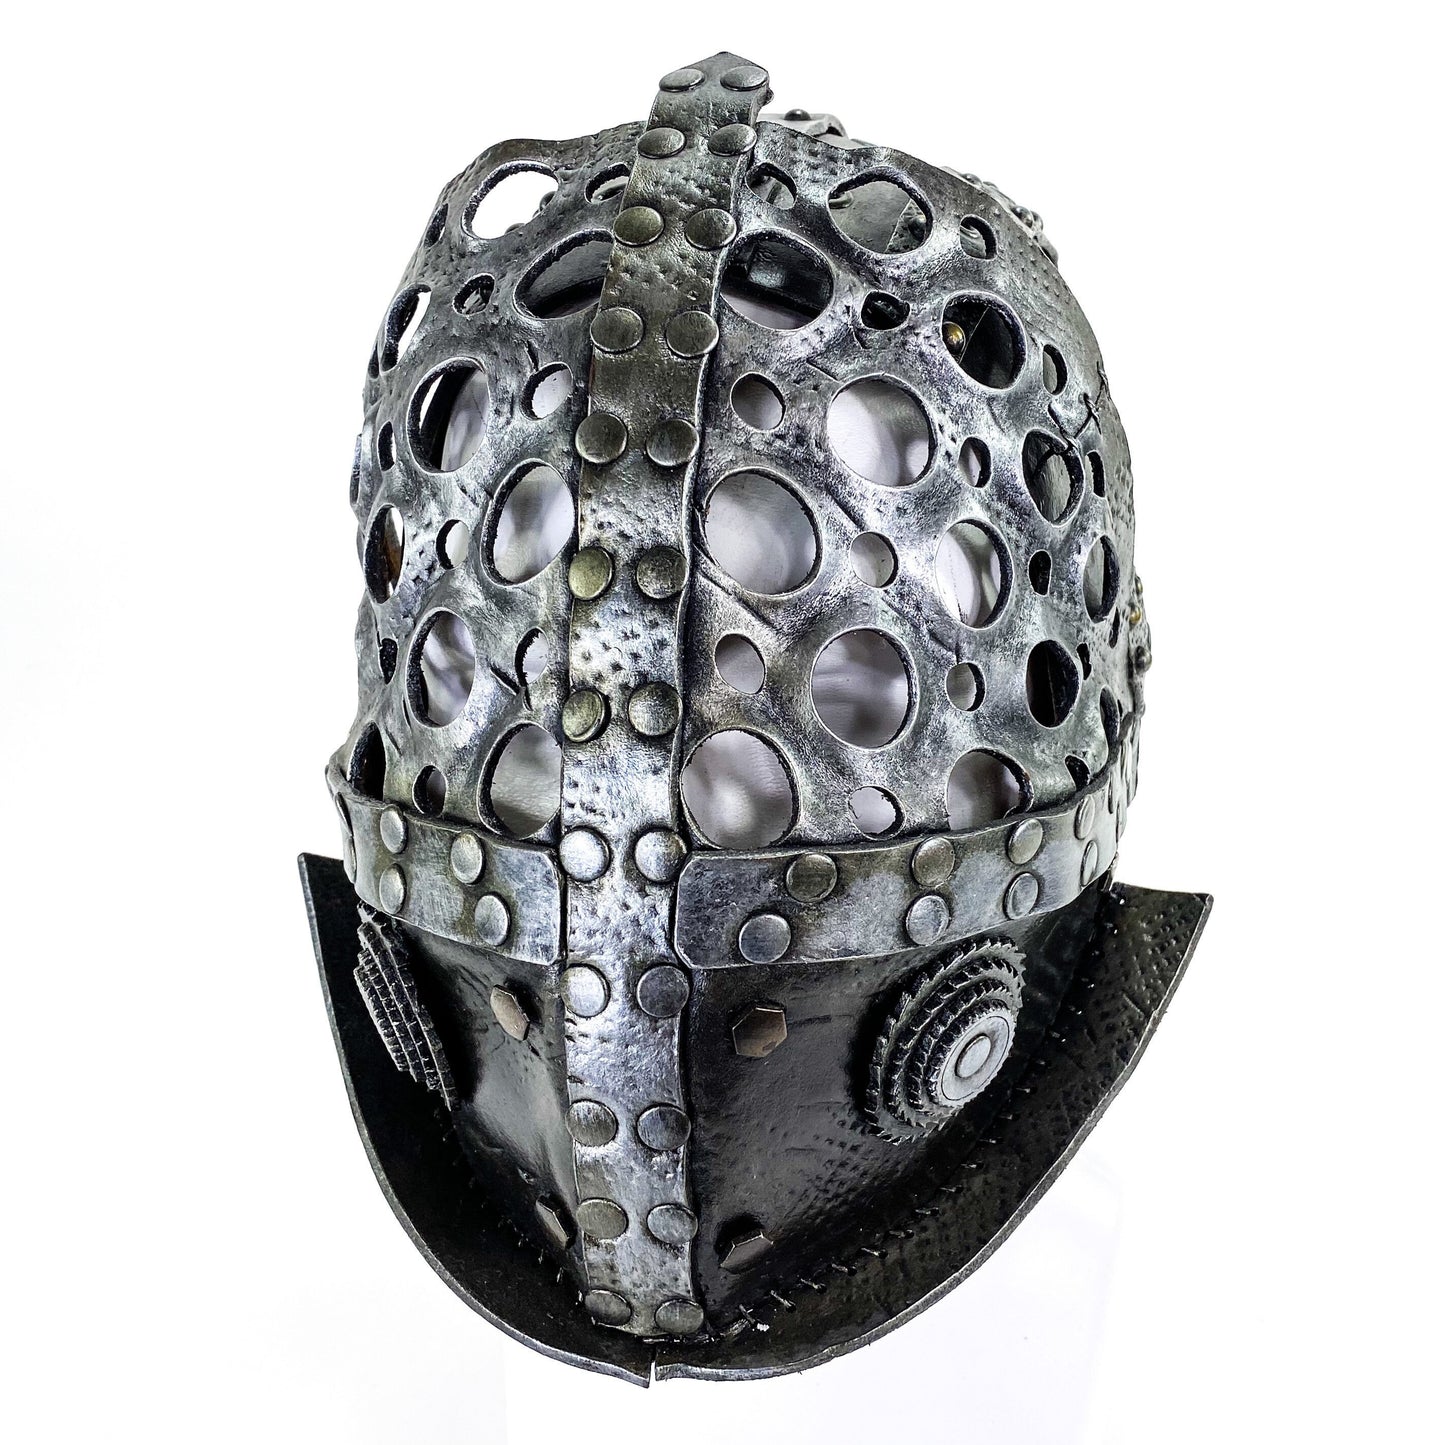 Final Closeout Sale - One of a kind Gladiator Handmade Genuine Leather Mask